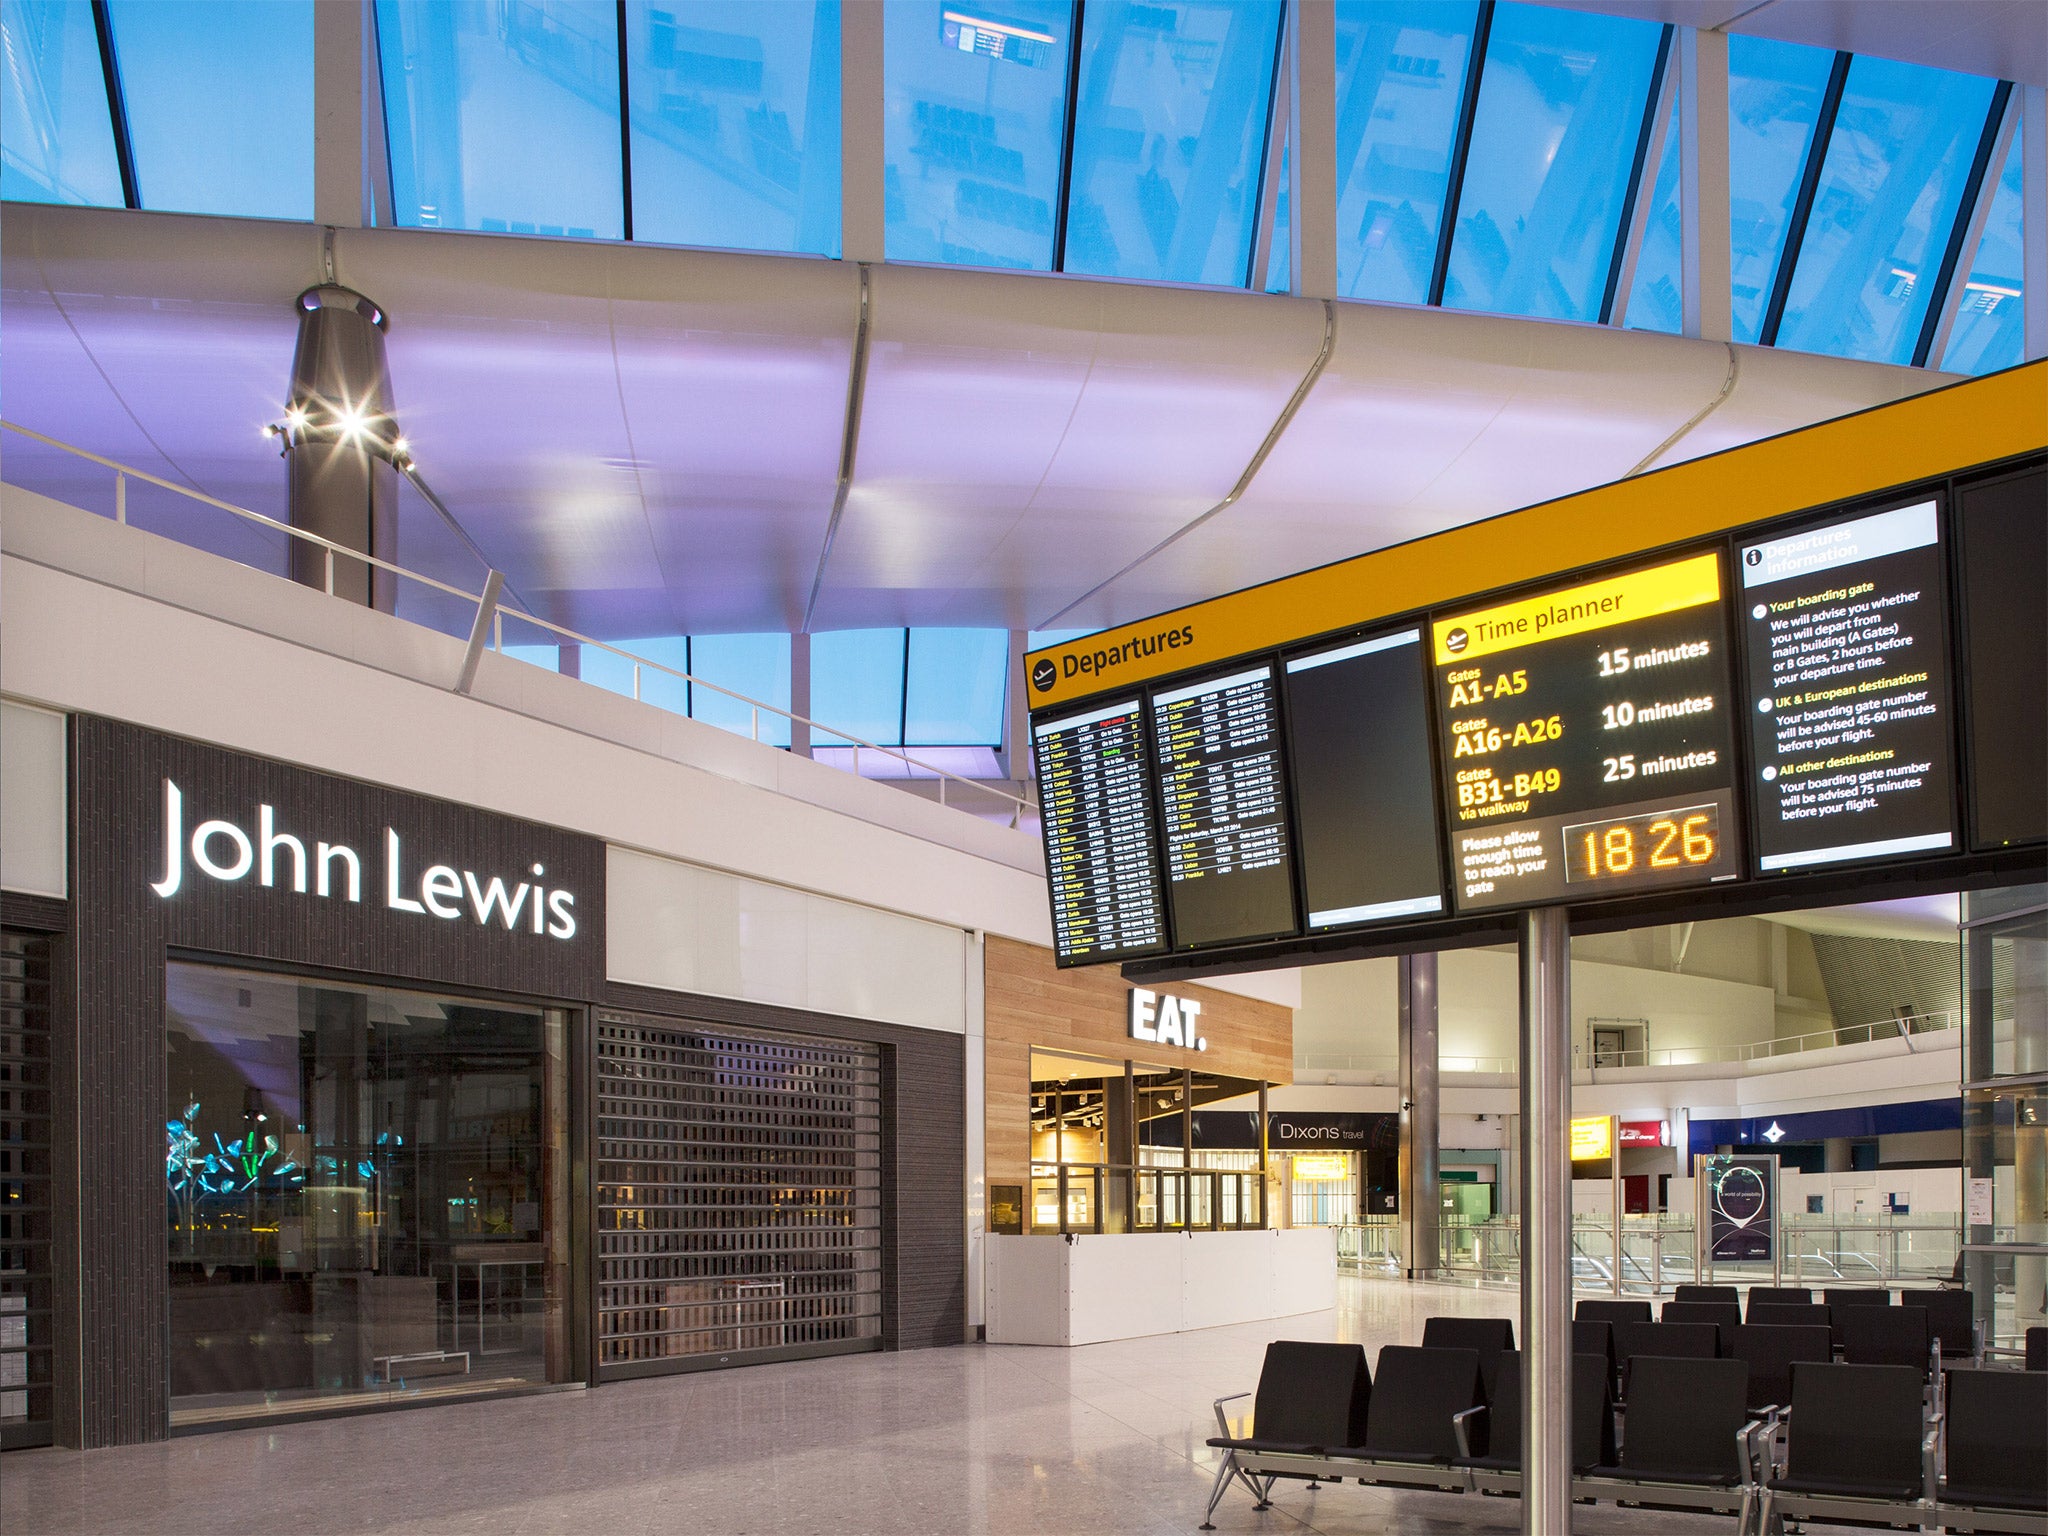 John Lewis deducts VAT from its airport prices, whether or not the customer is staying in the EU